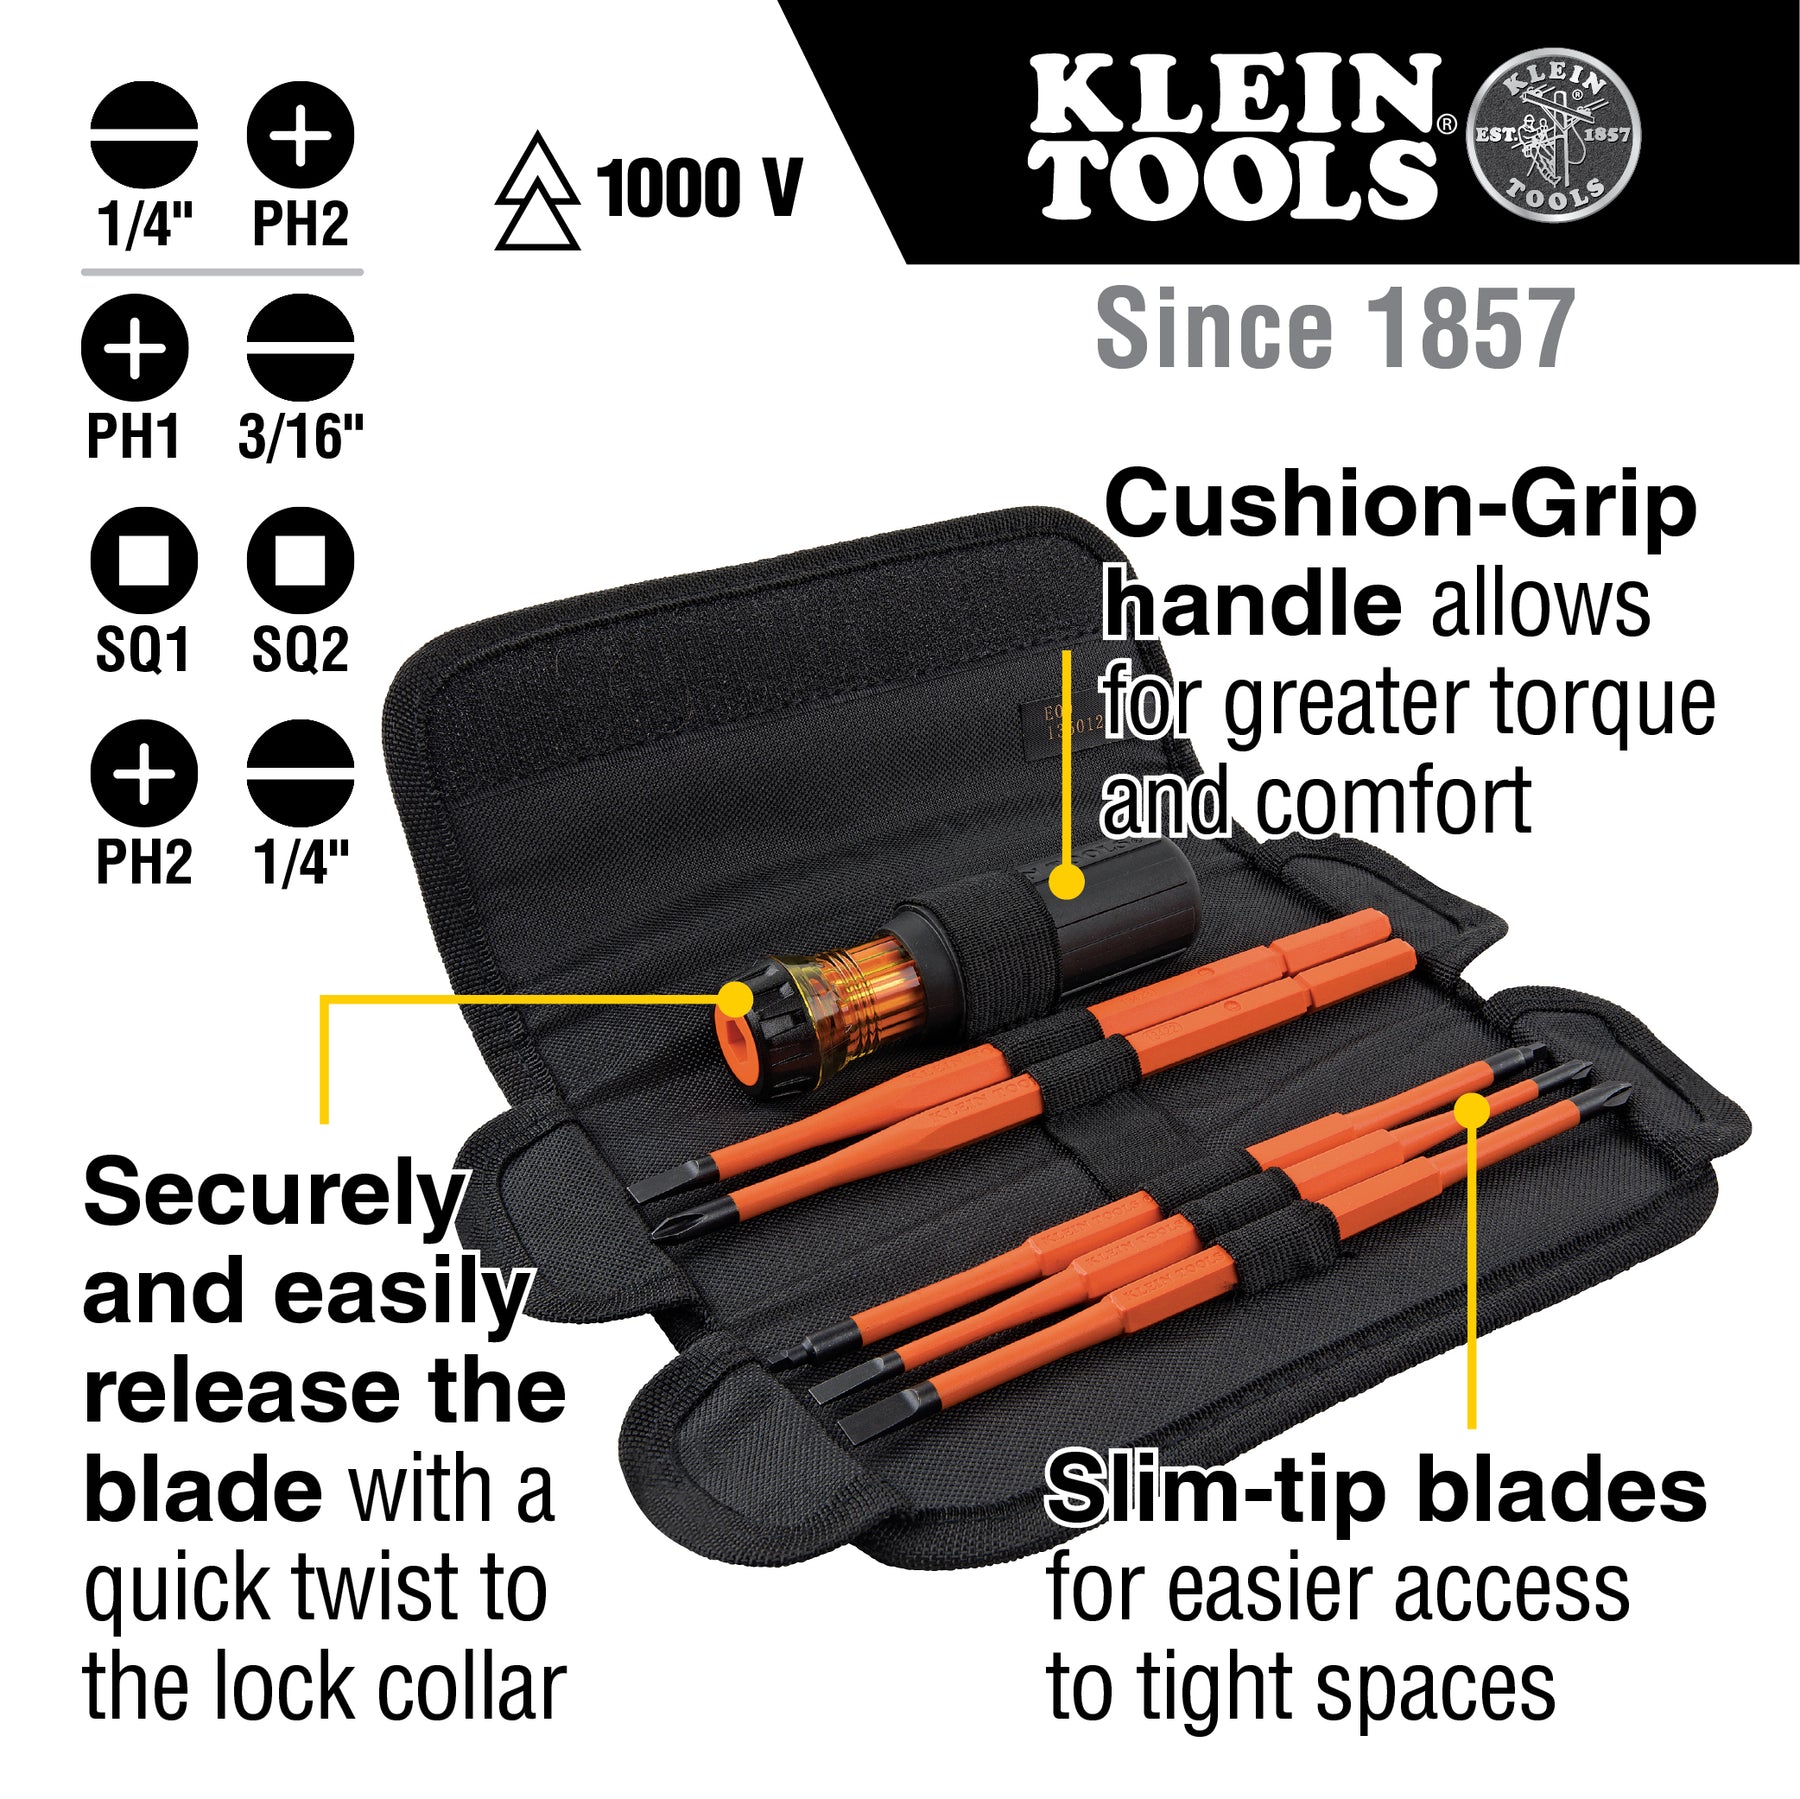 Klein Tools 94155 American Legacy Lineman Pliers and Klein-Kurve Wire Stripper / Cutter